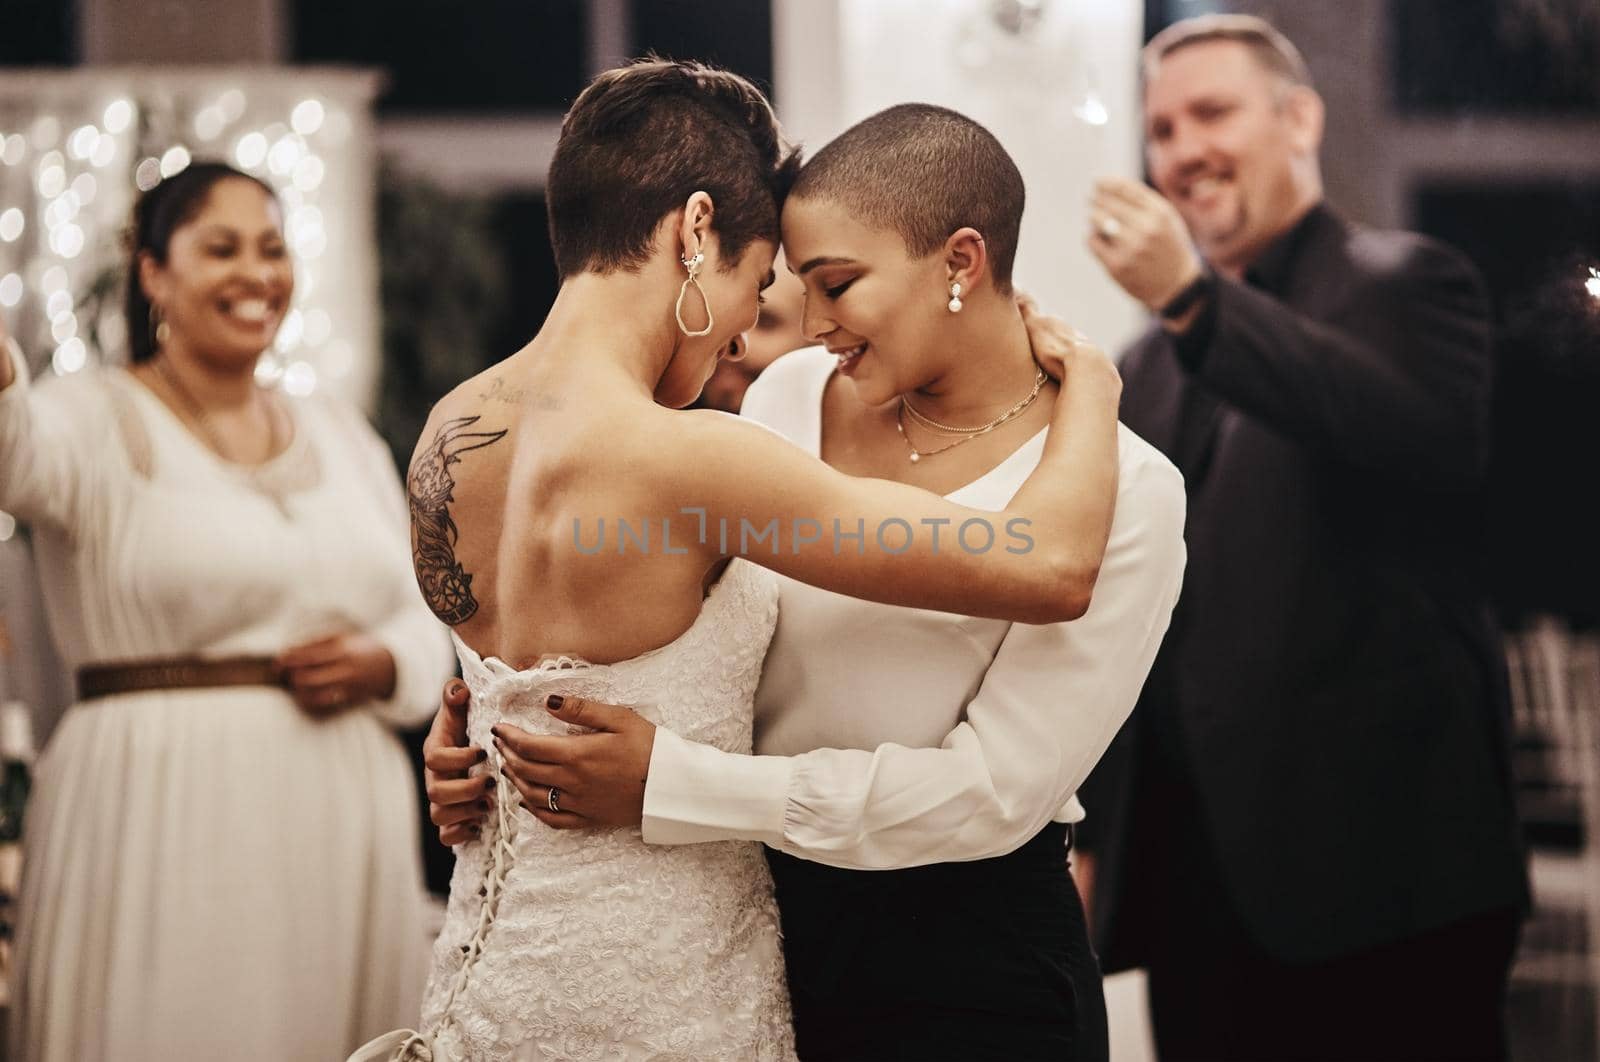 Shot of a newlywed couple dancing while being surrounded by their guests